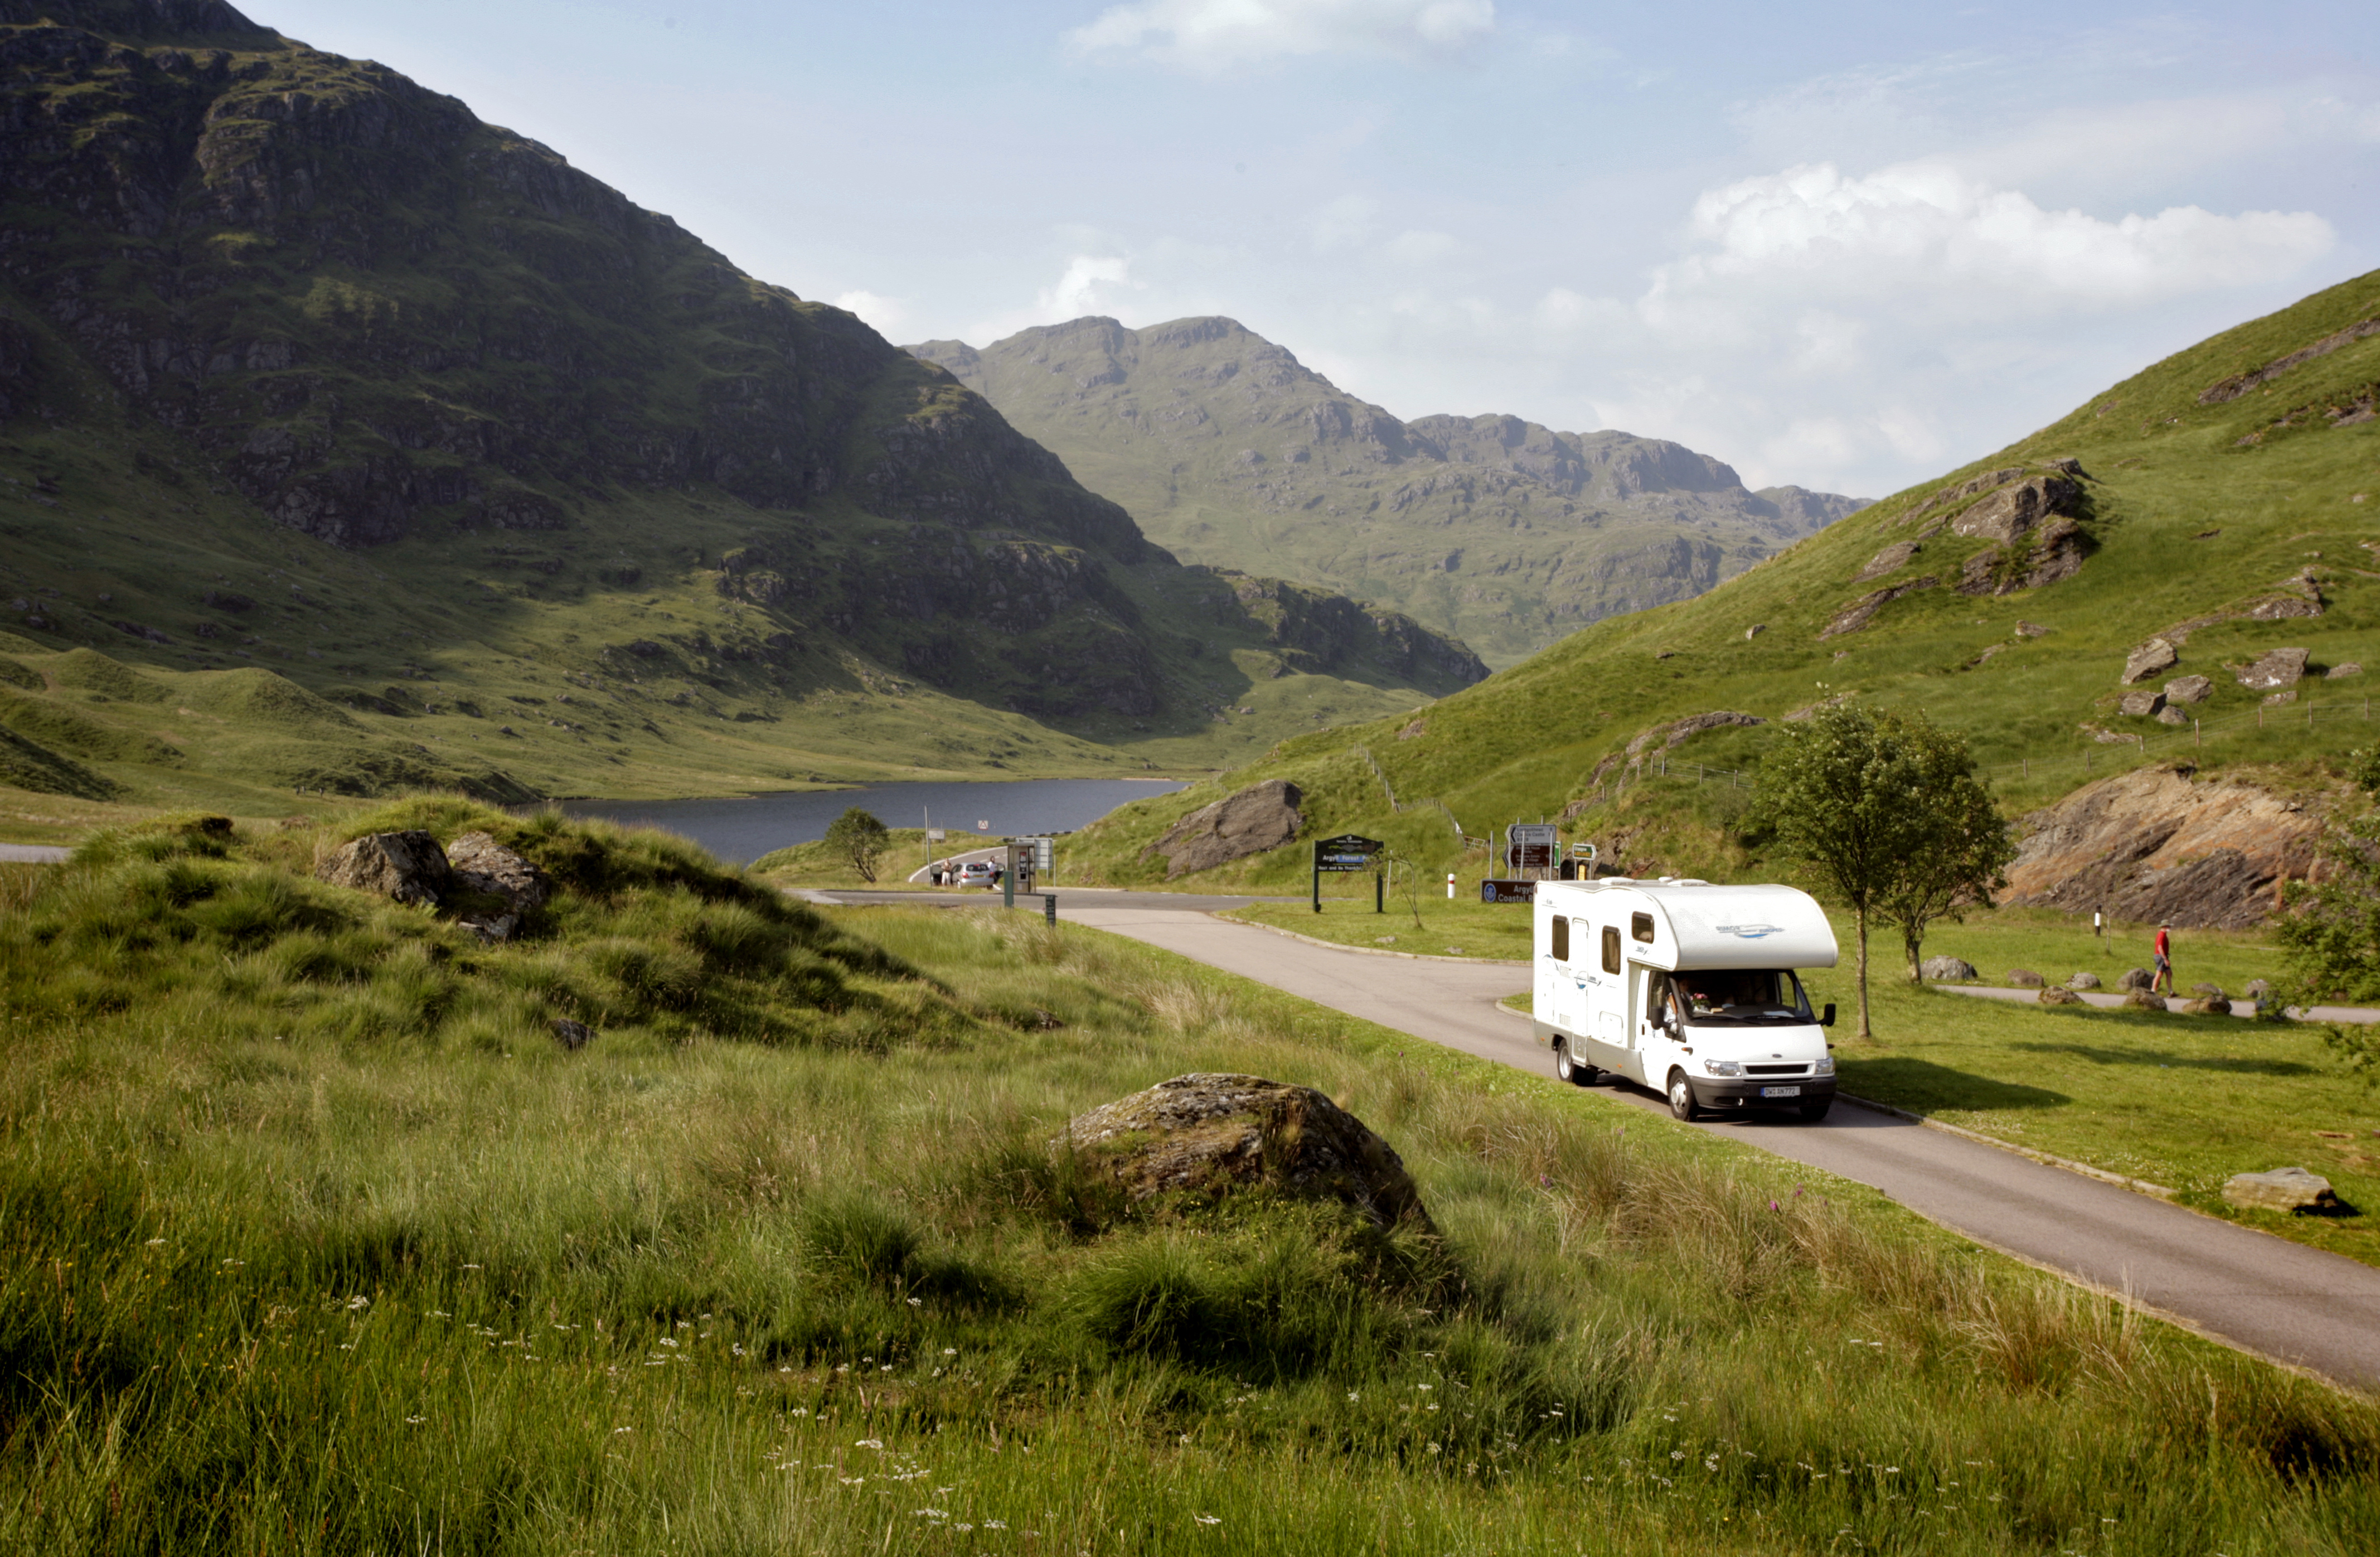 Motorhome driving on singletrack road surrounded by lush green hillsides